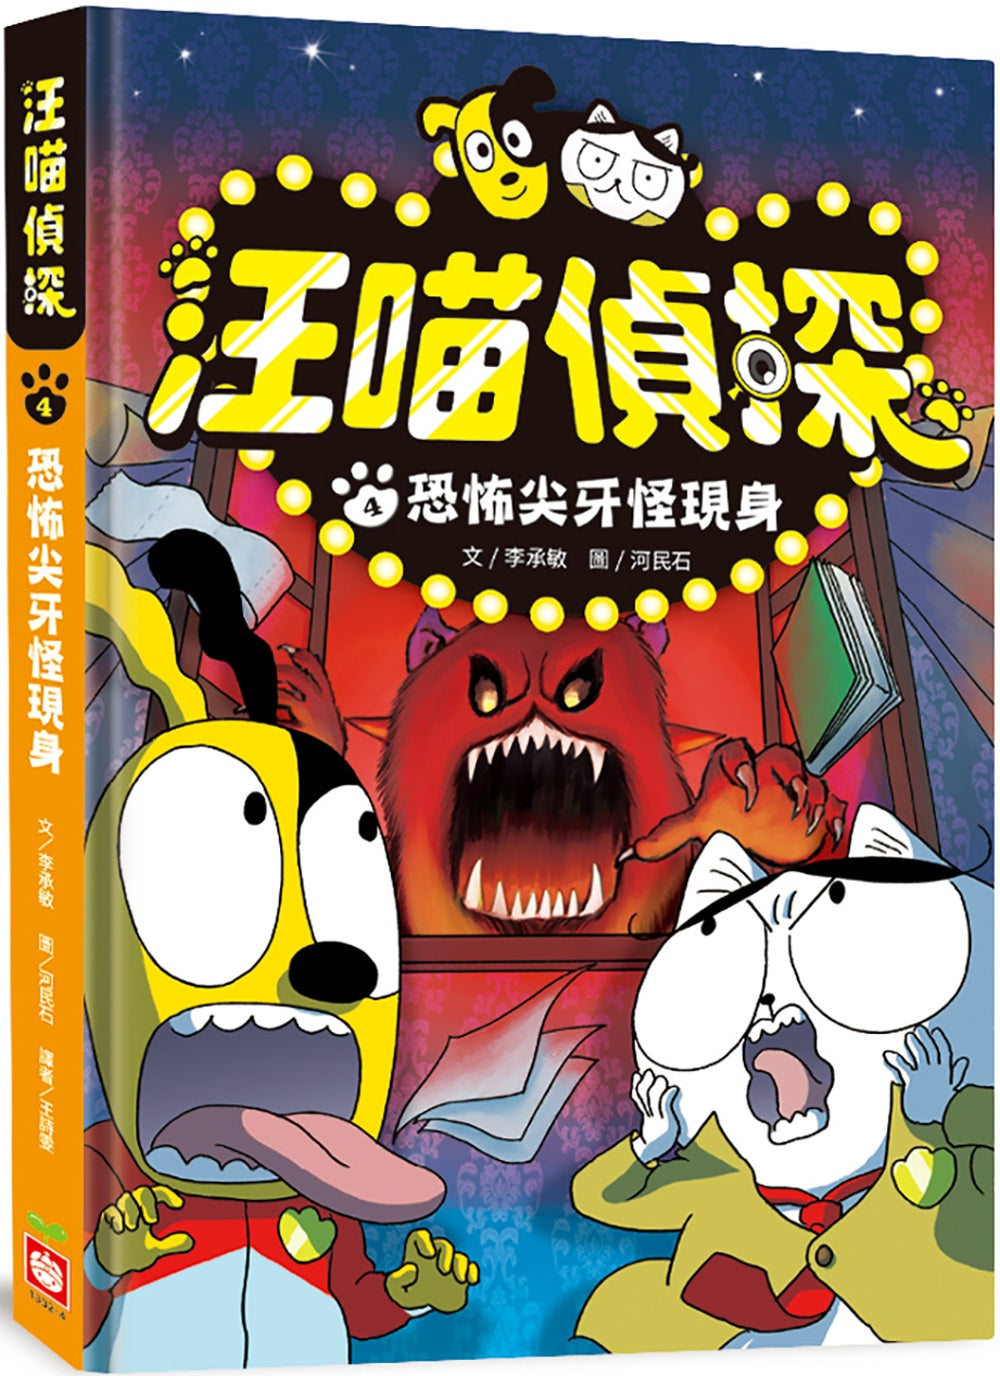 Detective Woof & Meow 4: The Arrival of Terrifying Fangs • 汪喵偵探4：恐怖尖牙怪現身